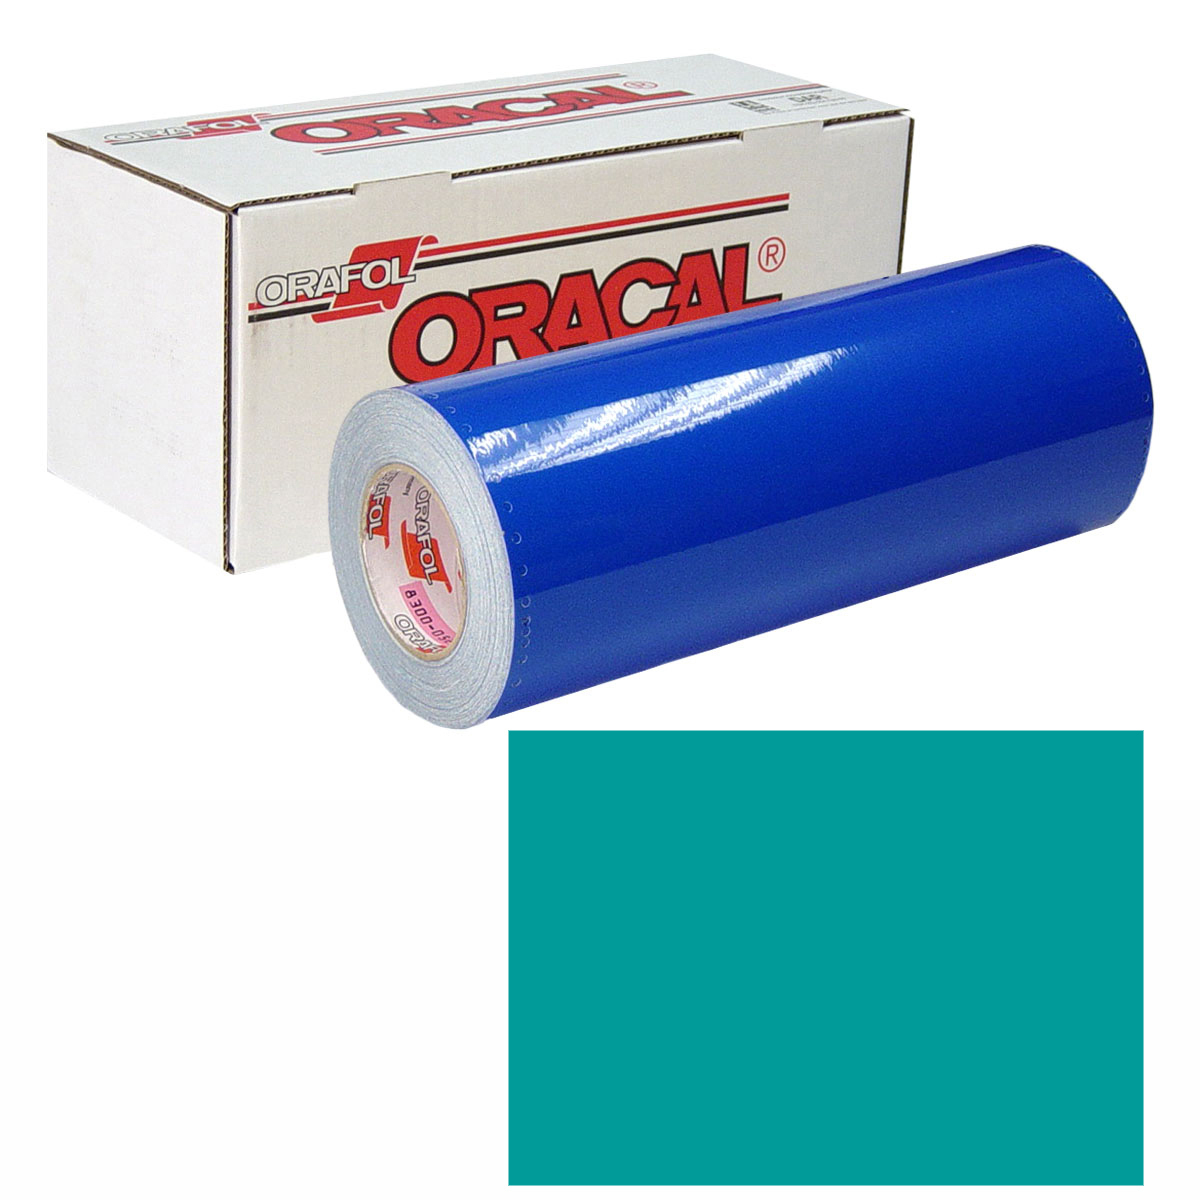 ORACAL 631 Unp 48in X 50yd 054 Turquoise